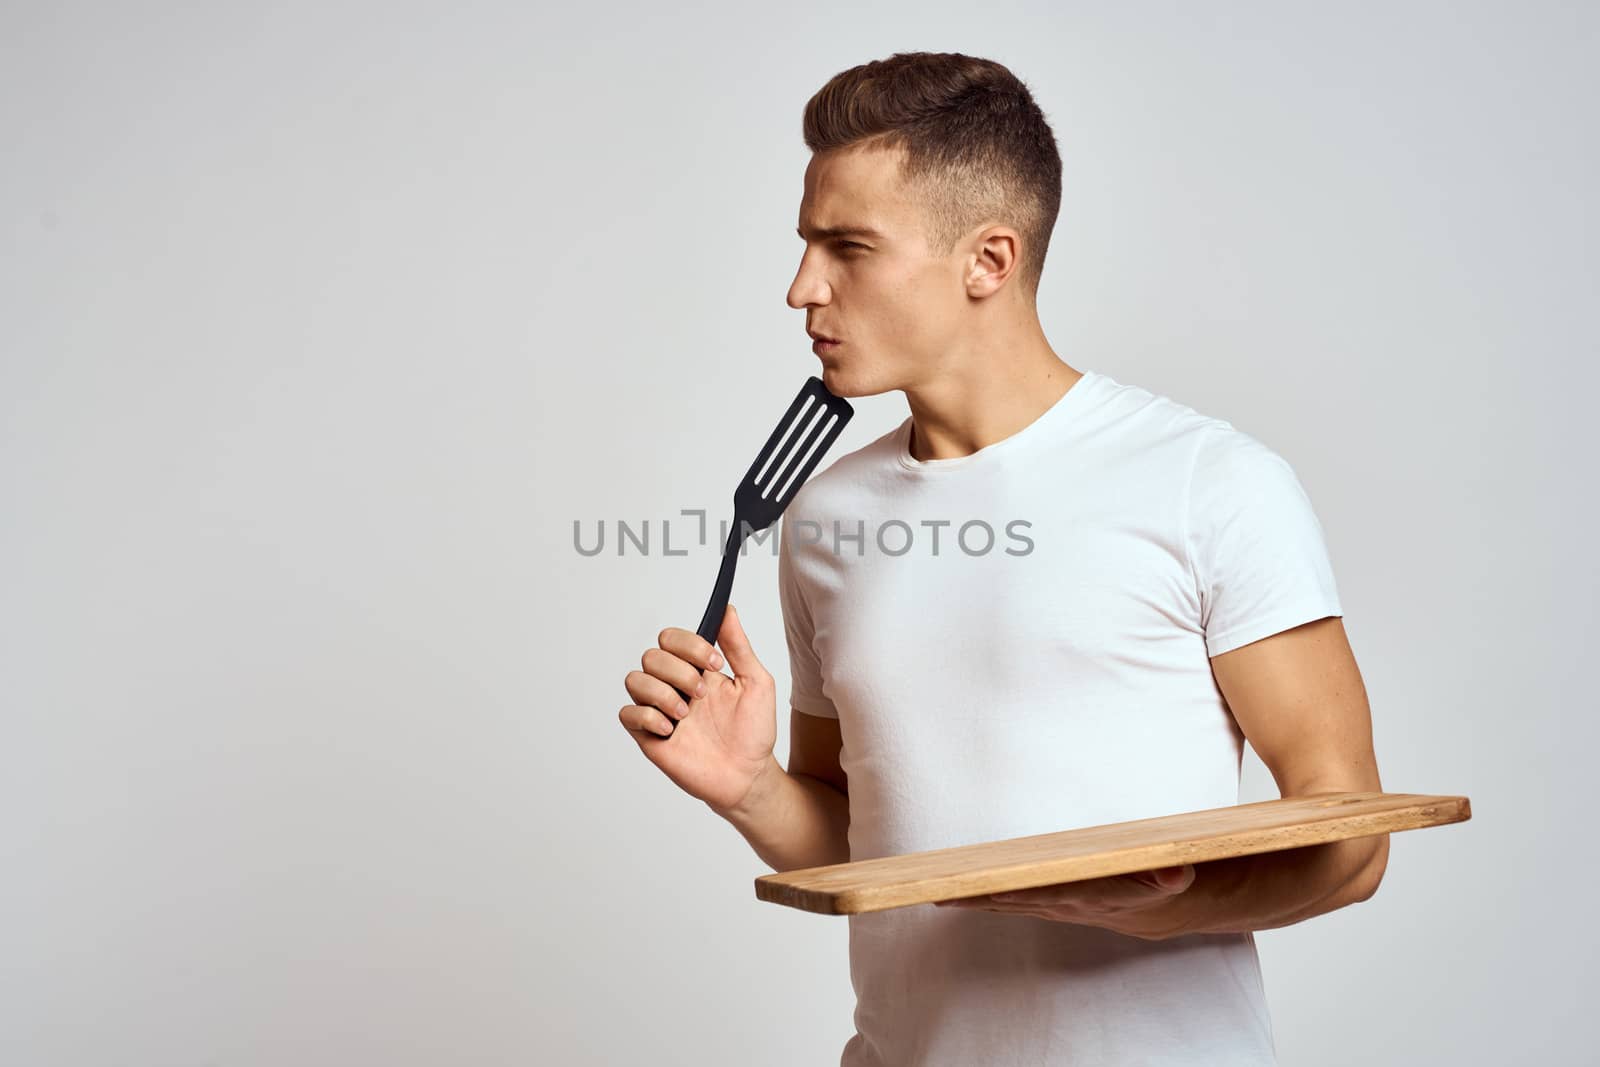 Guy with kitchen tools in hands on a light background cropped view of emotions fun model by SHOTPRIME